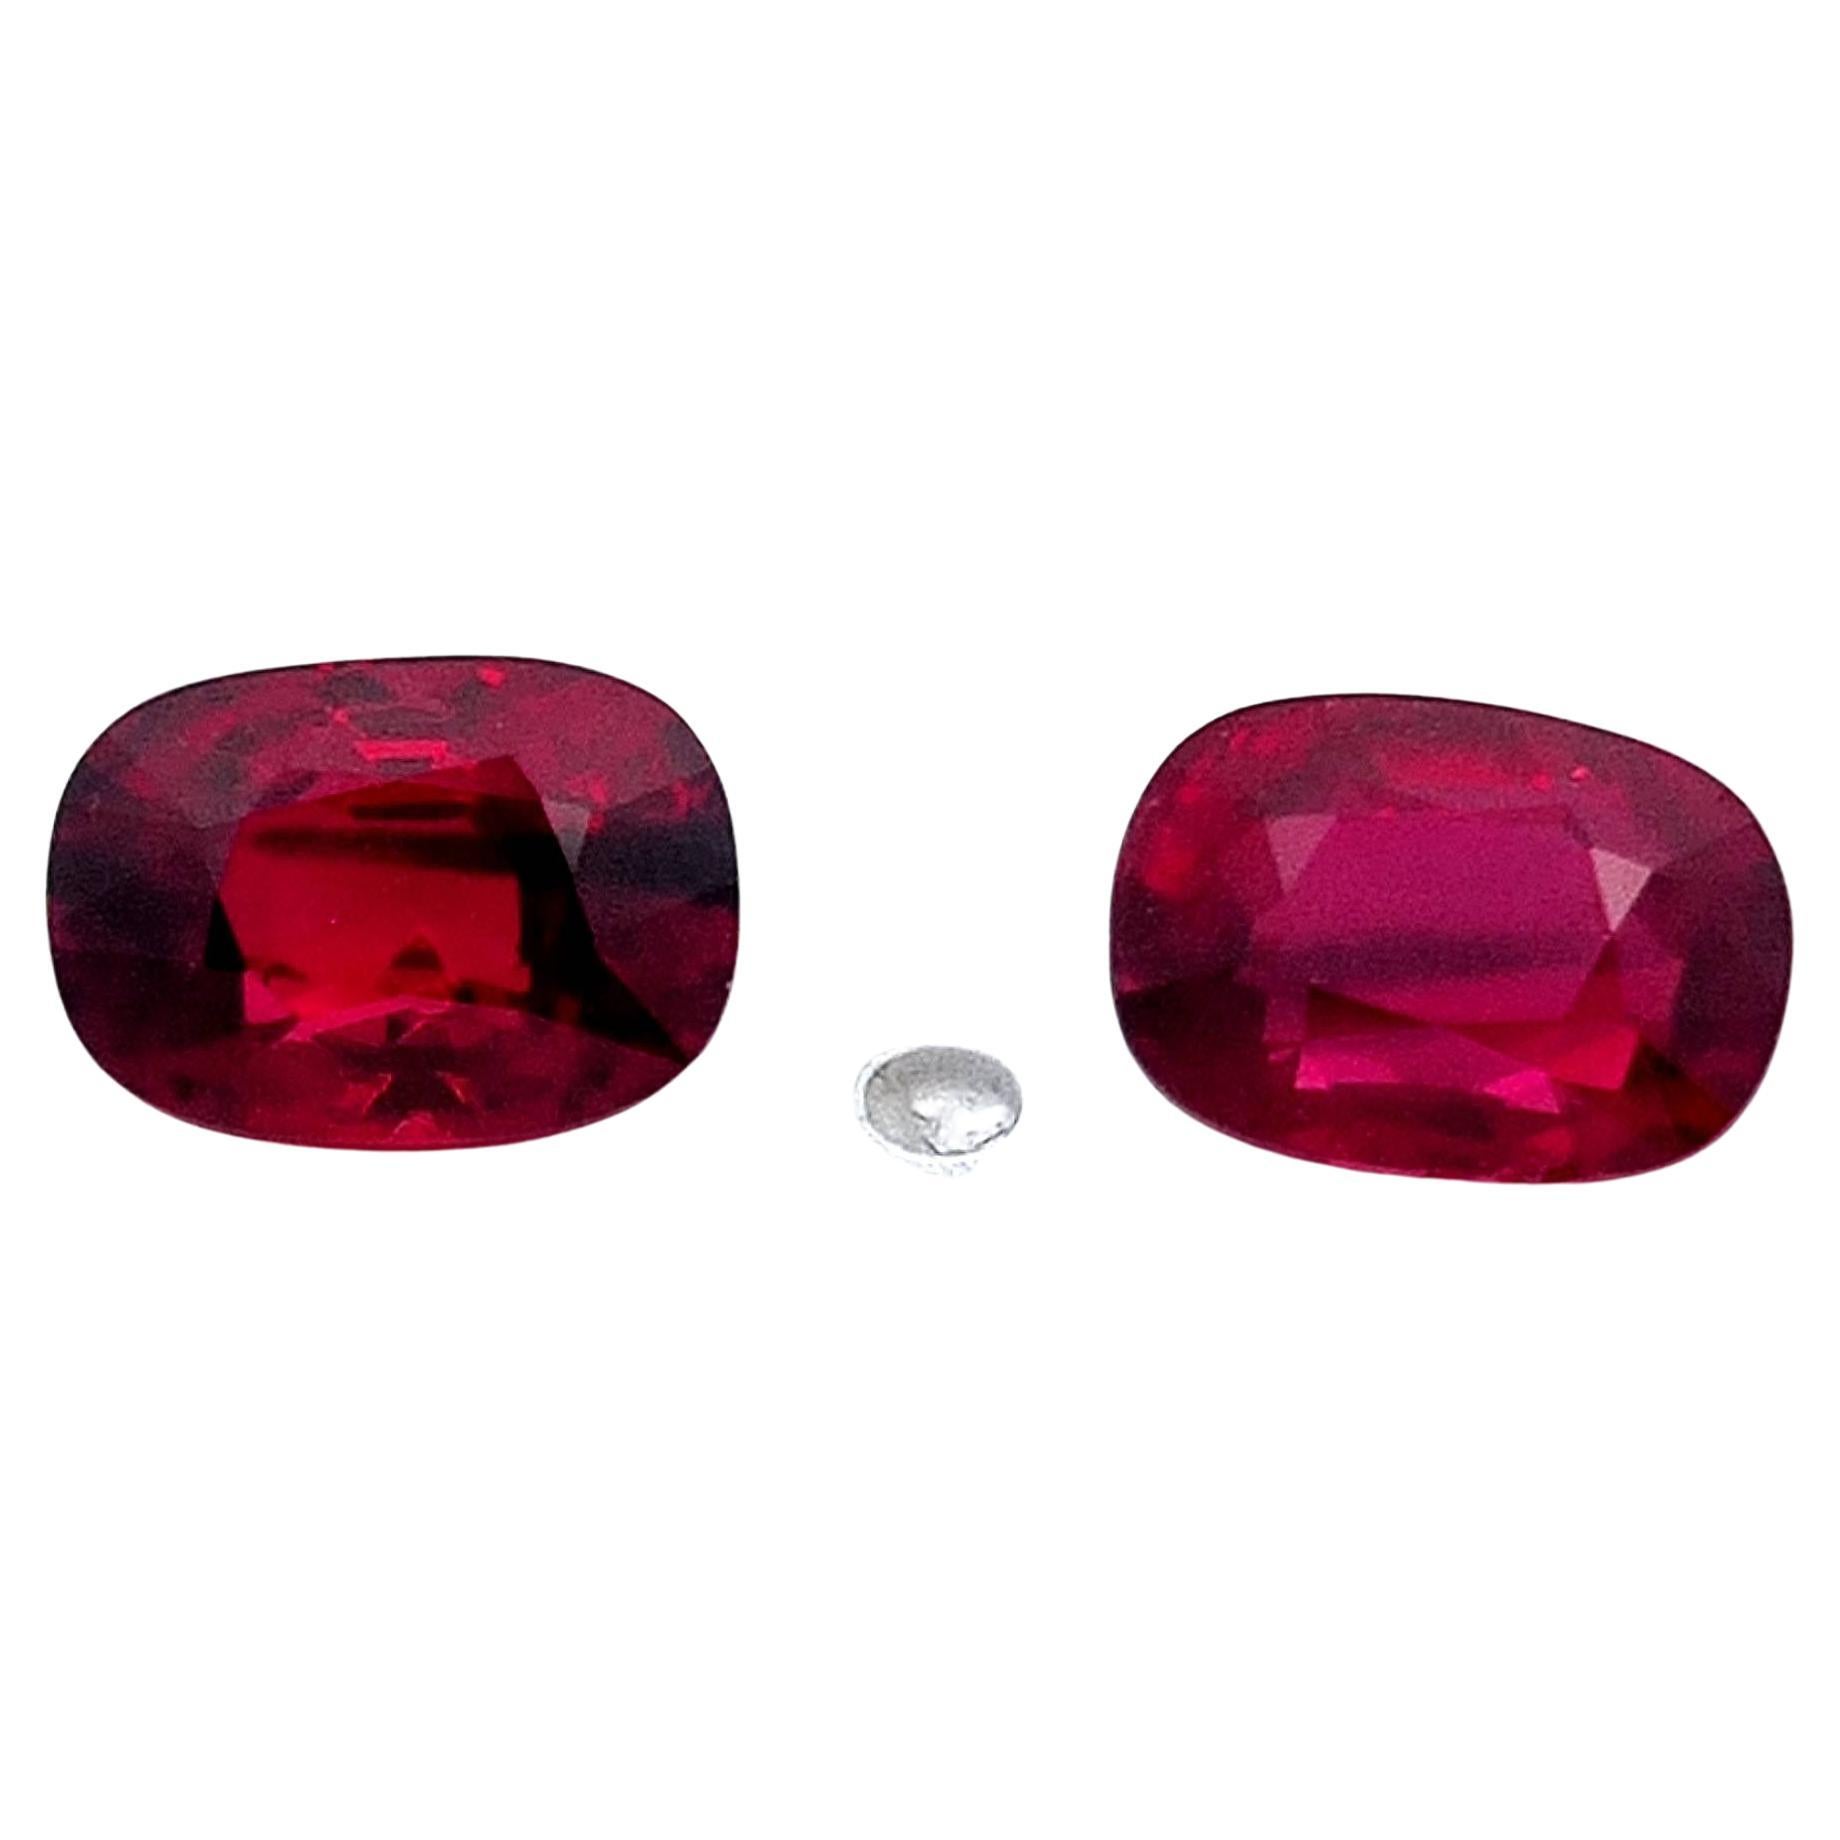 A Pair of 1 Carat Unheated Burmese 'Pigeons Blood' Rubies For Sale